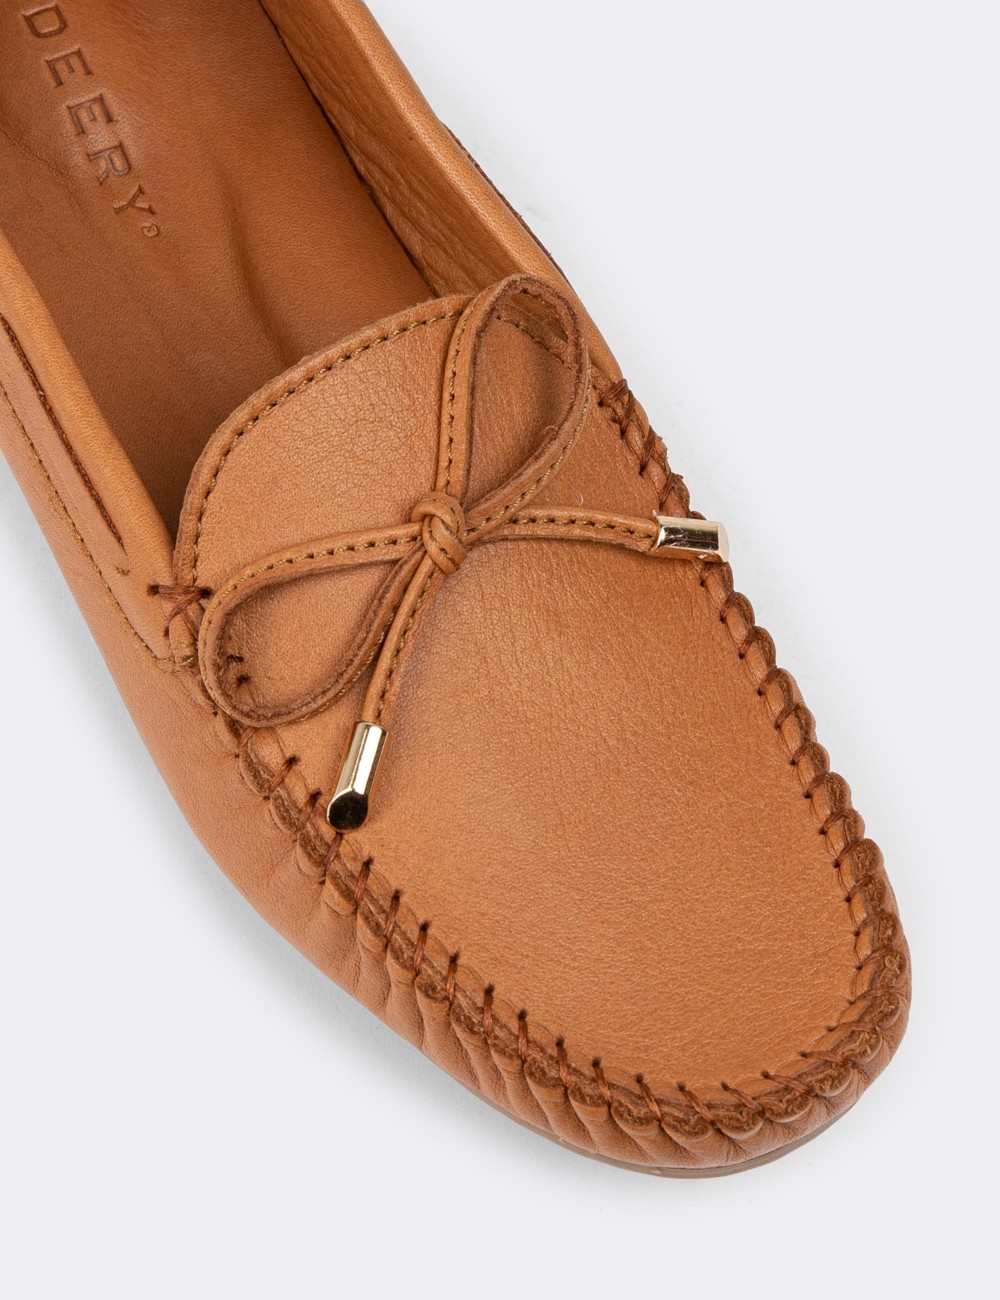 Tan Leather Loafers - SW101ZTBAC01